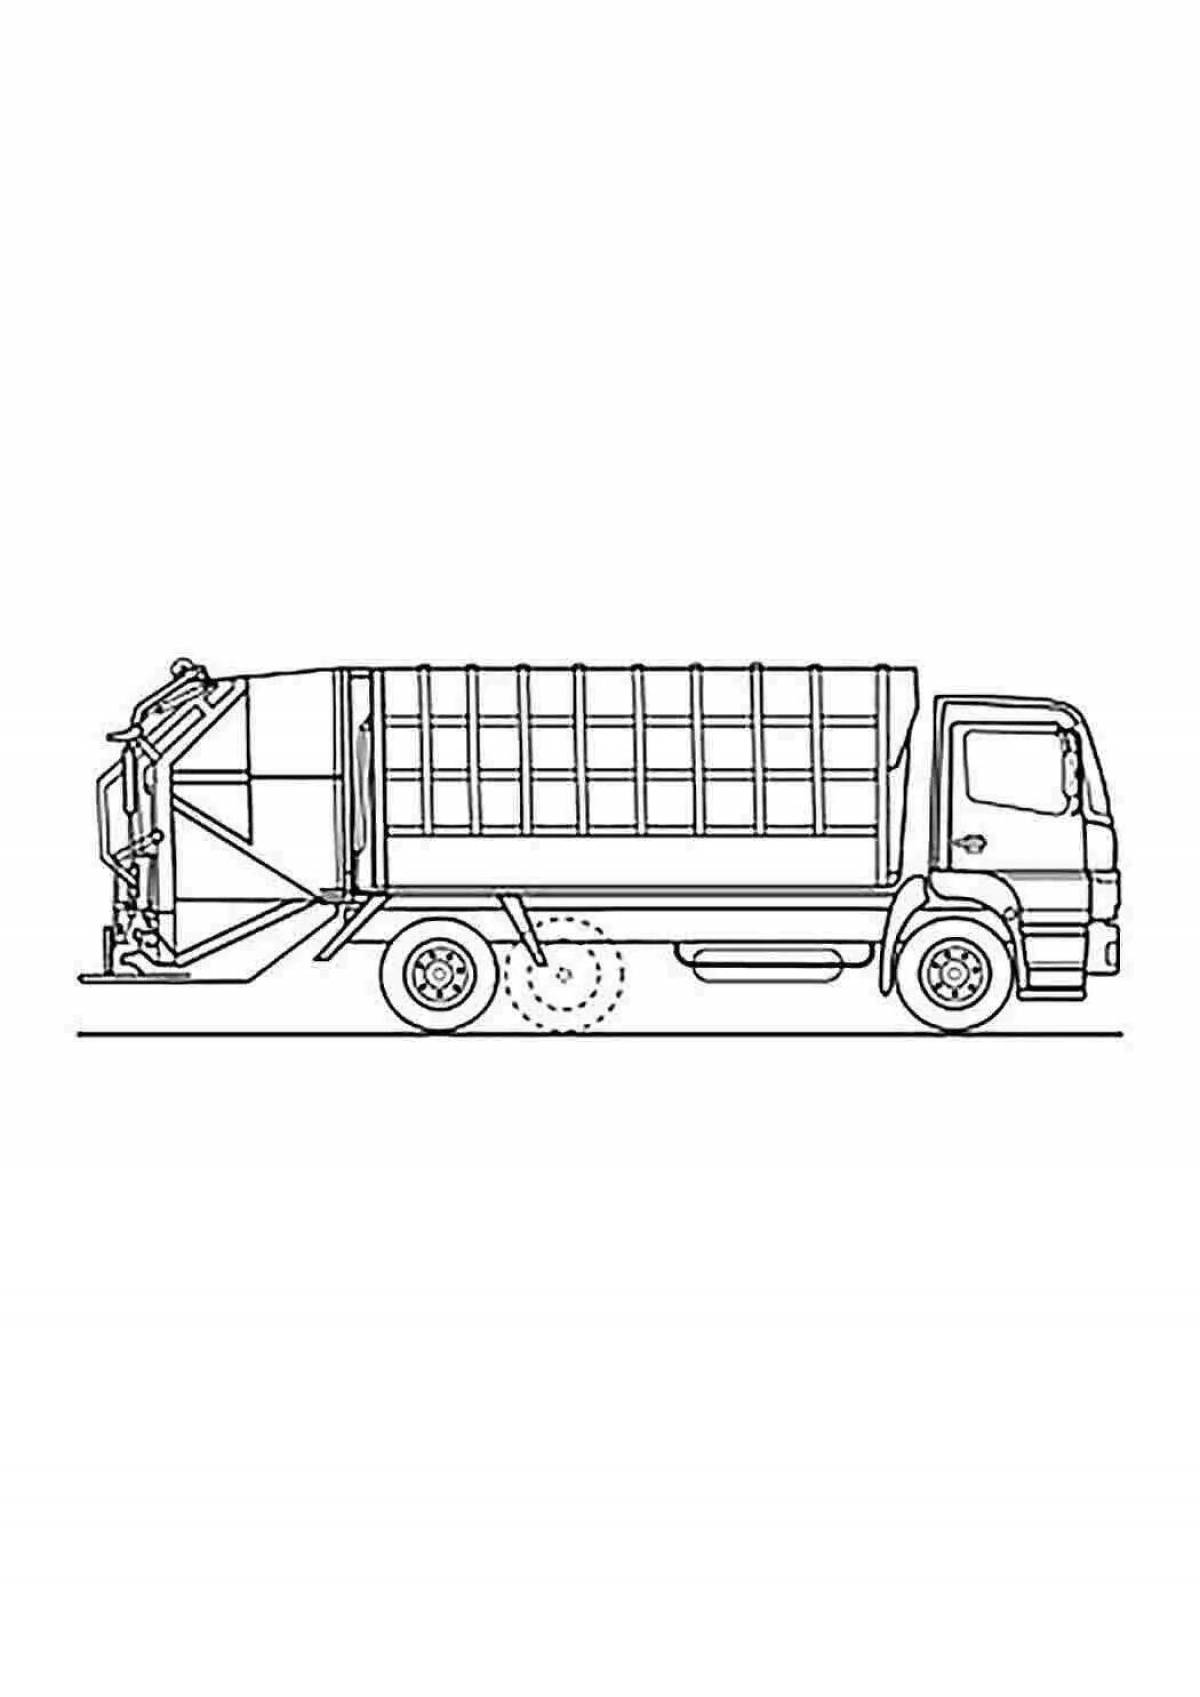 Glorious garbage truck coloring page for kids